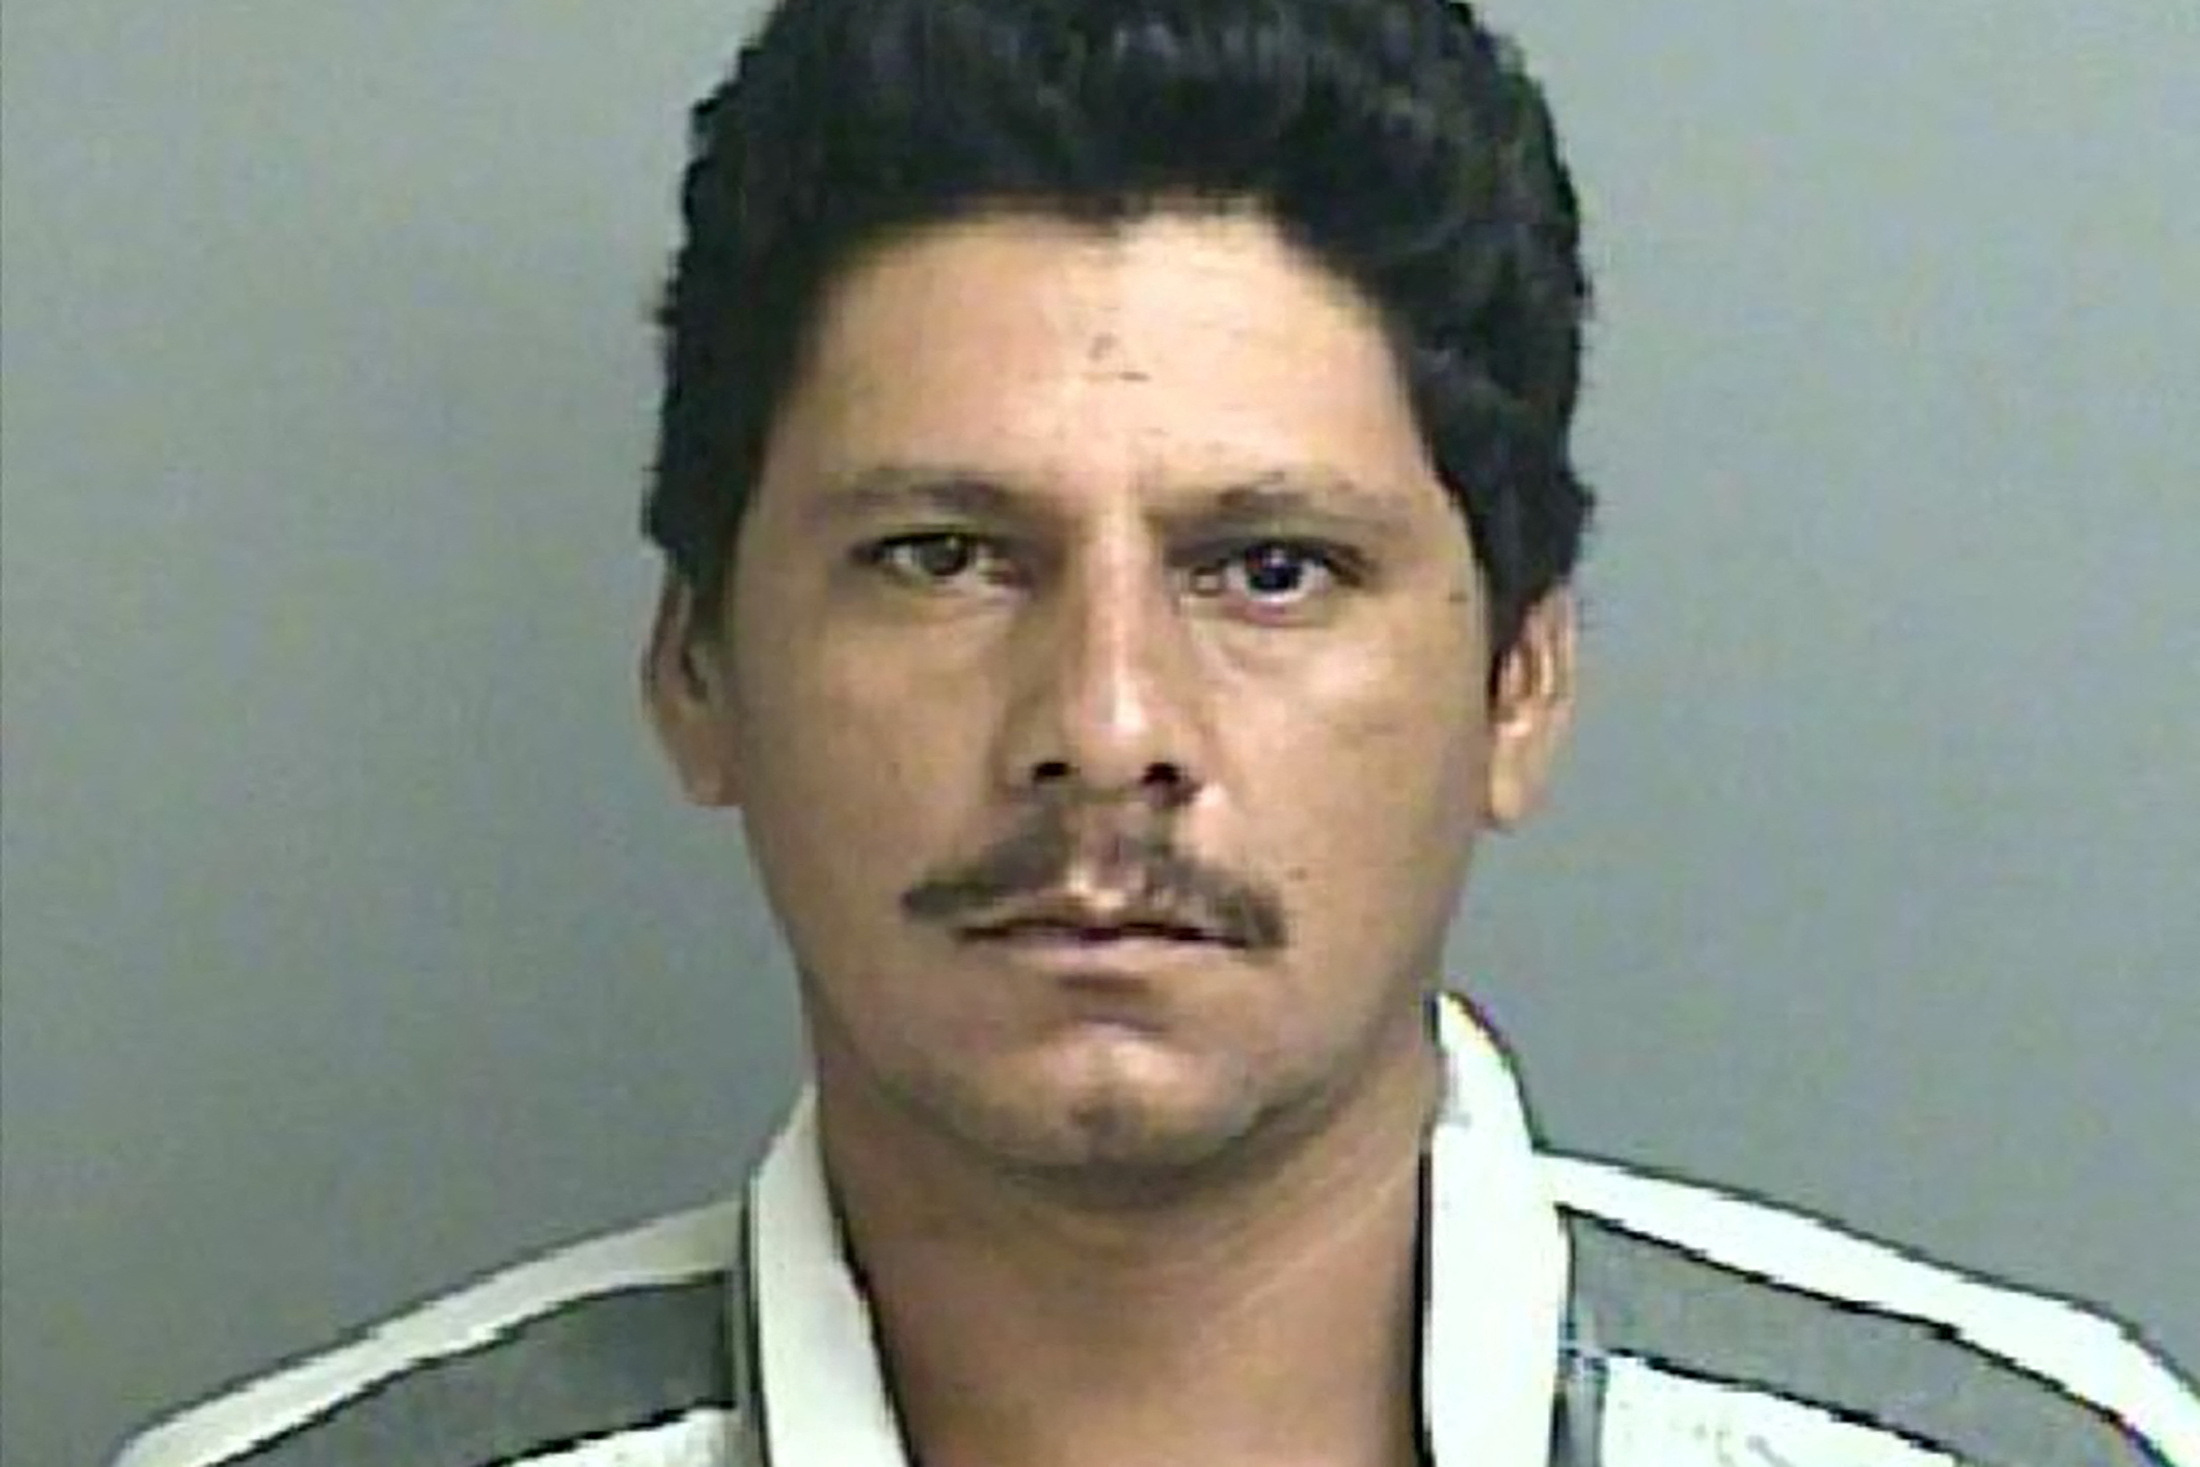 Texas manhunt murder subject Francisco Oropesa appears in photo released by FBI